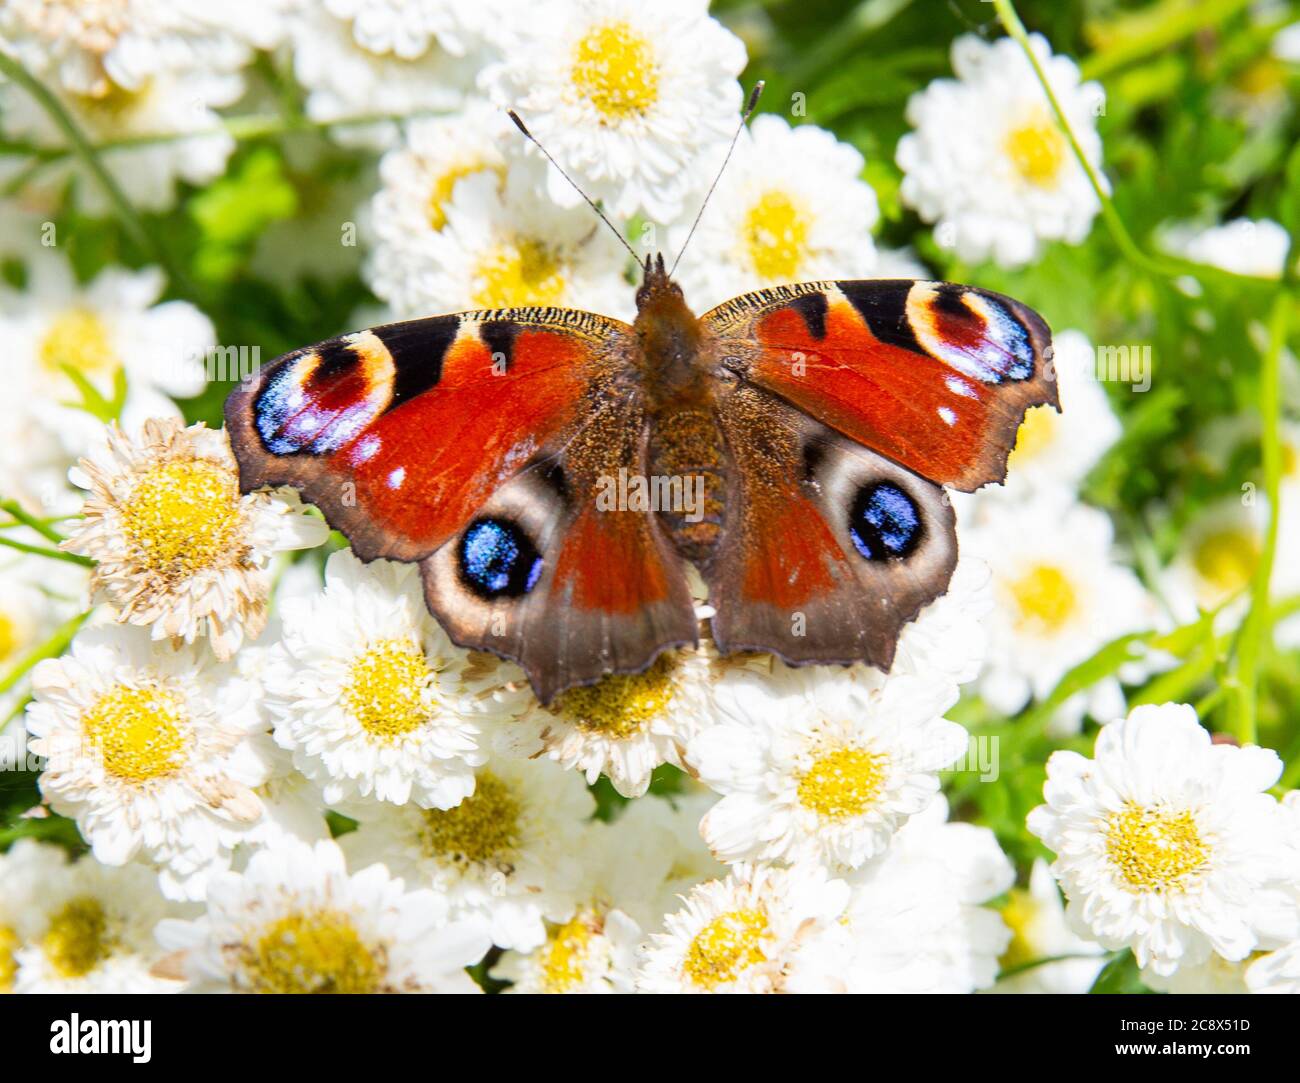 A Peacock butterfly, Aglais io, the European Peacock, feeds from a Feverfew plant, flowering a garden in Devon, United Kingdom. Stock Photo